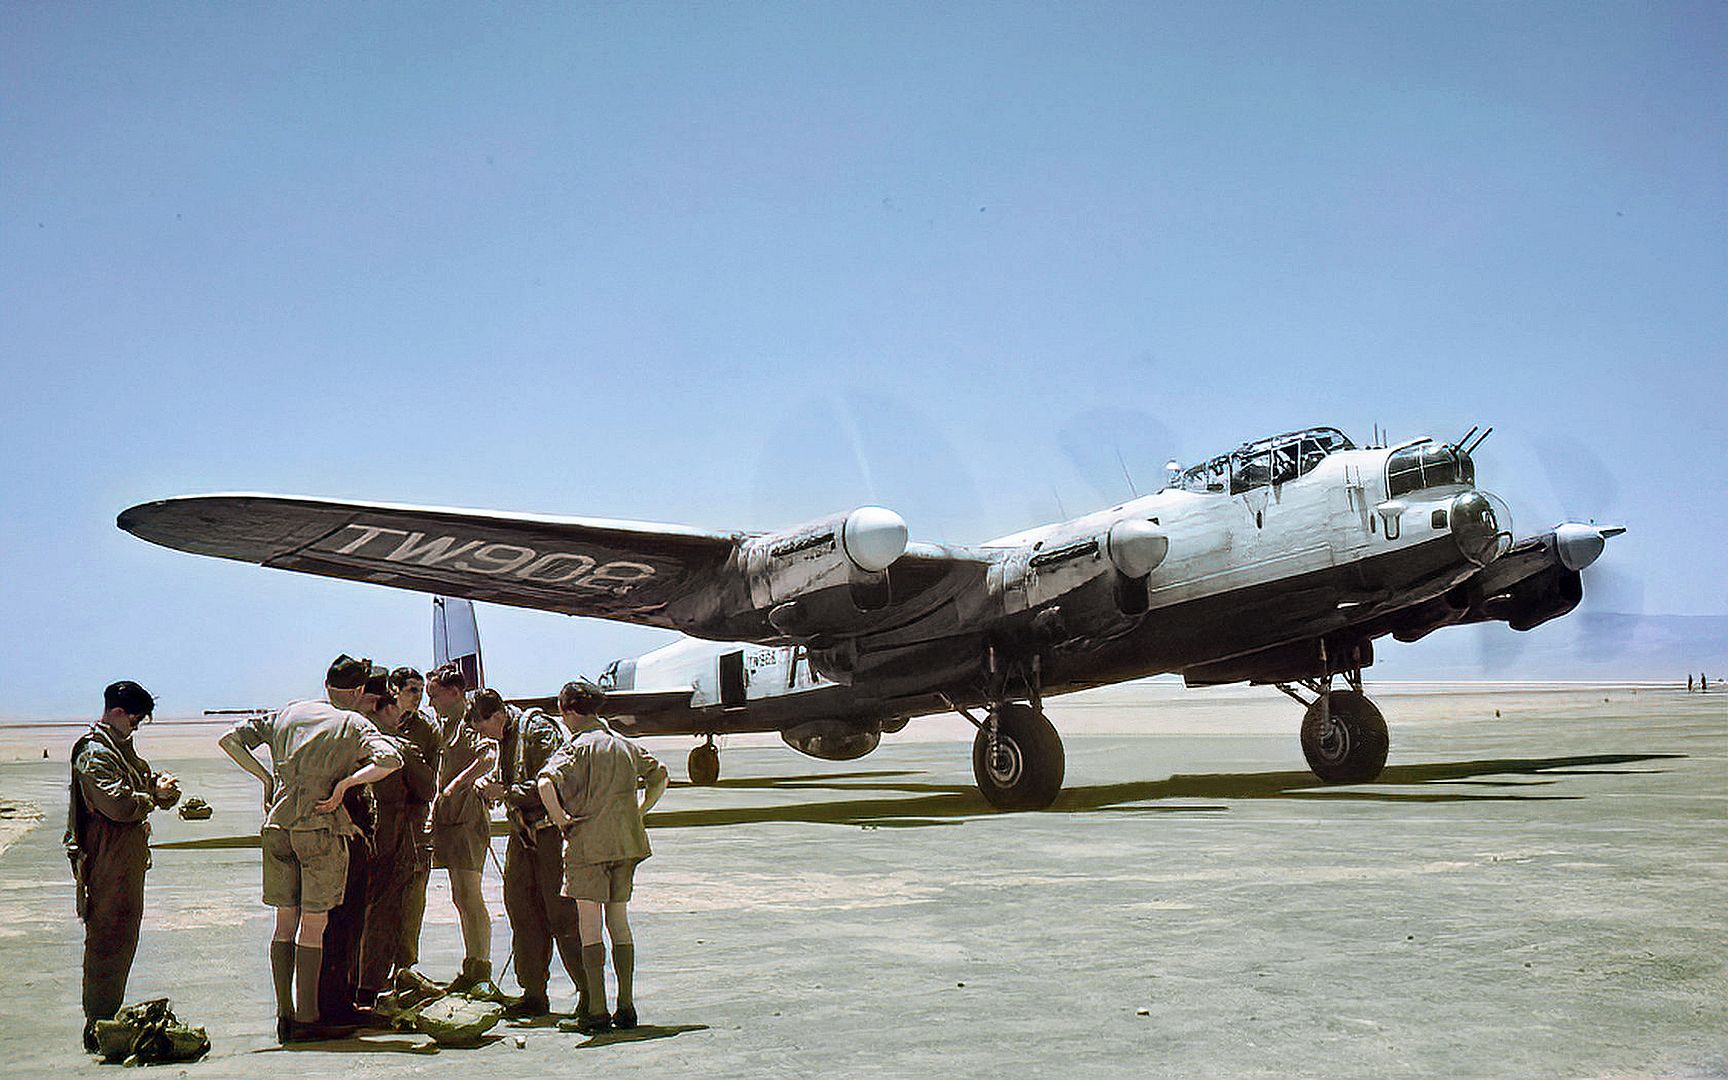 Avro Lancaster B Mk I TW908 From No 148 Squadron Prepares To Take Off For A Training Exercise From RAF Shallufa Air Base In Egypt In July 1948